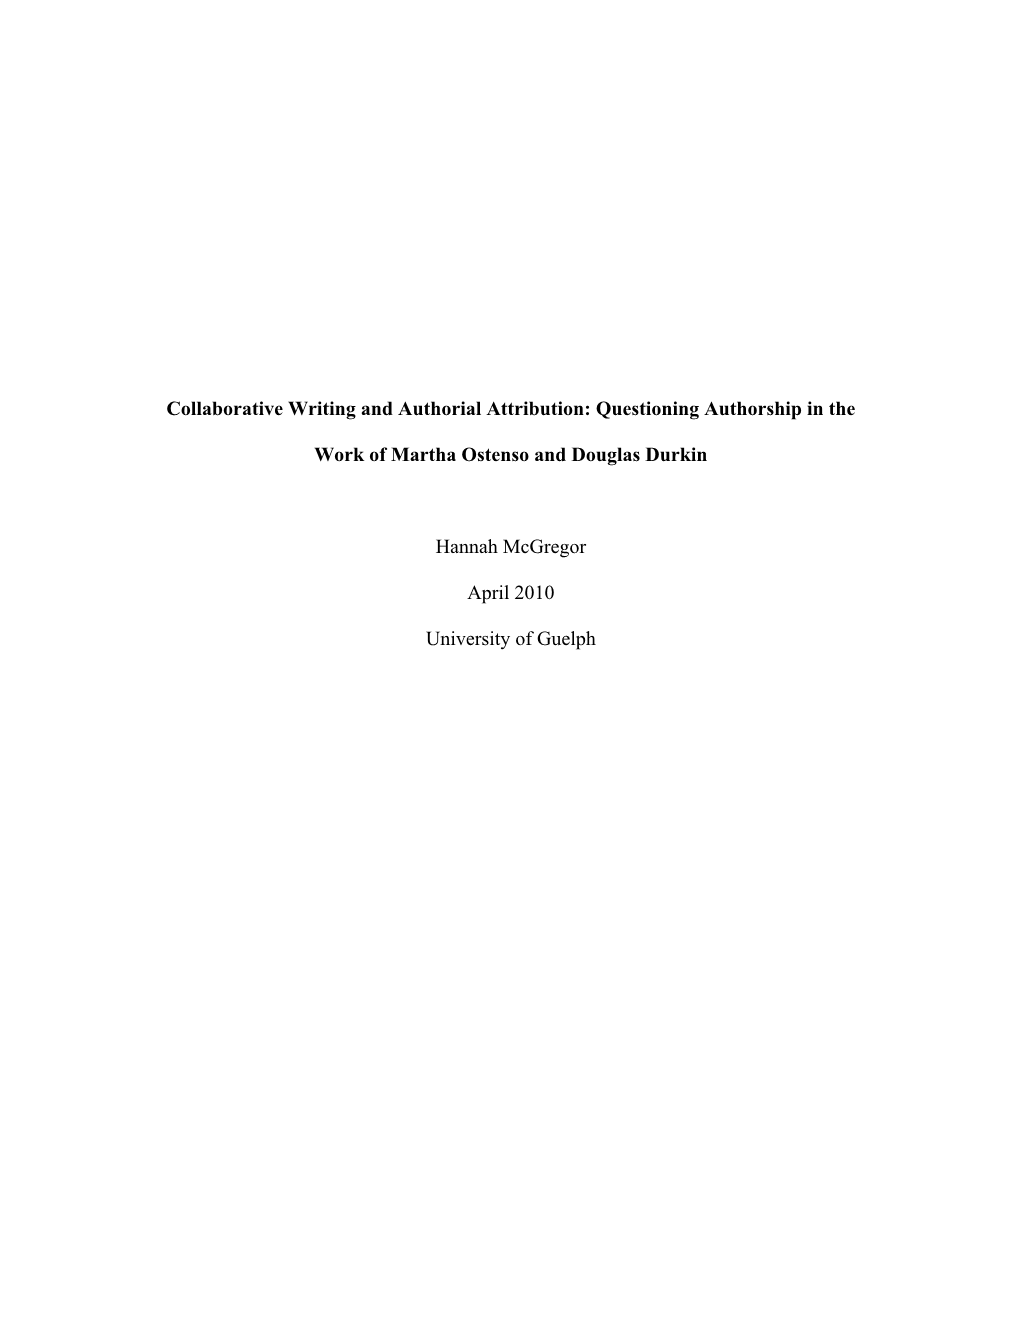 Collaborative Writing and Authorial Attribution: Questioning Authorship in The